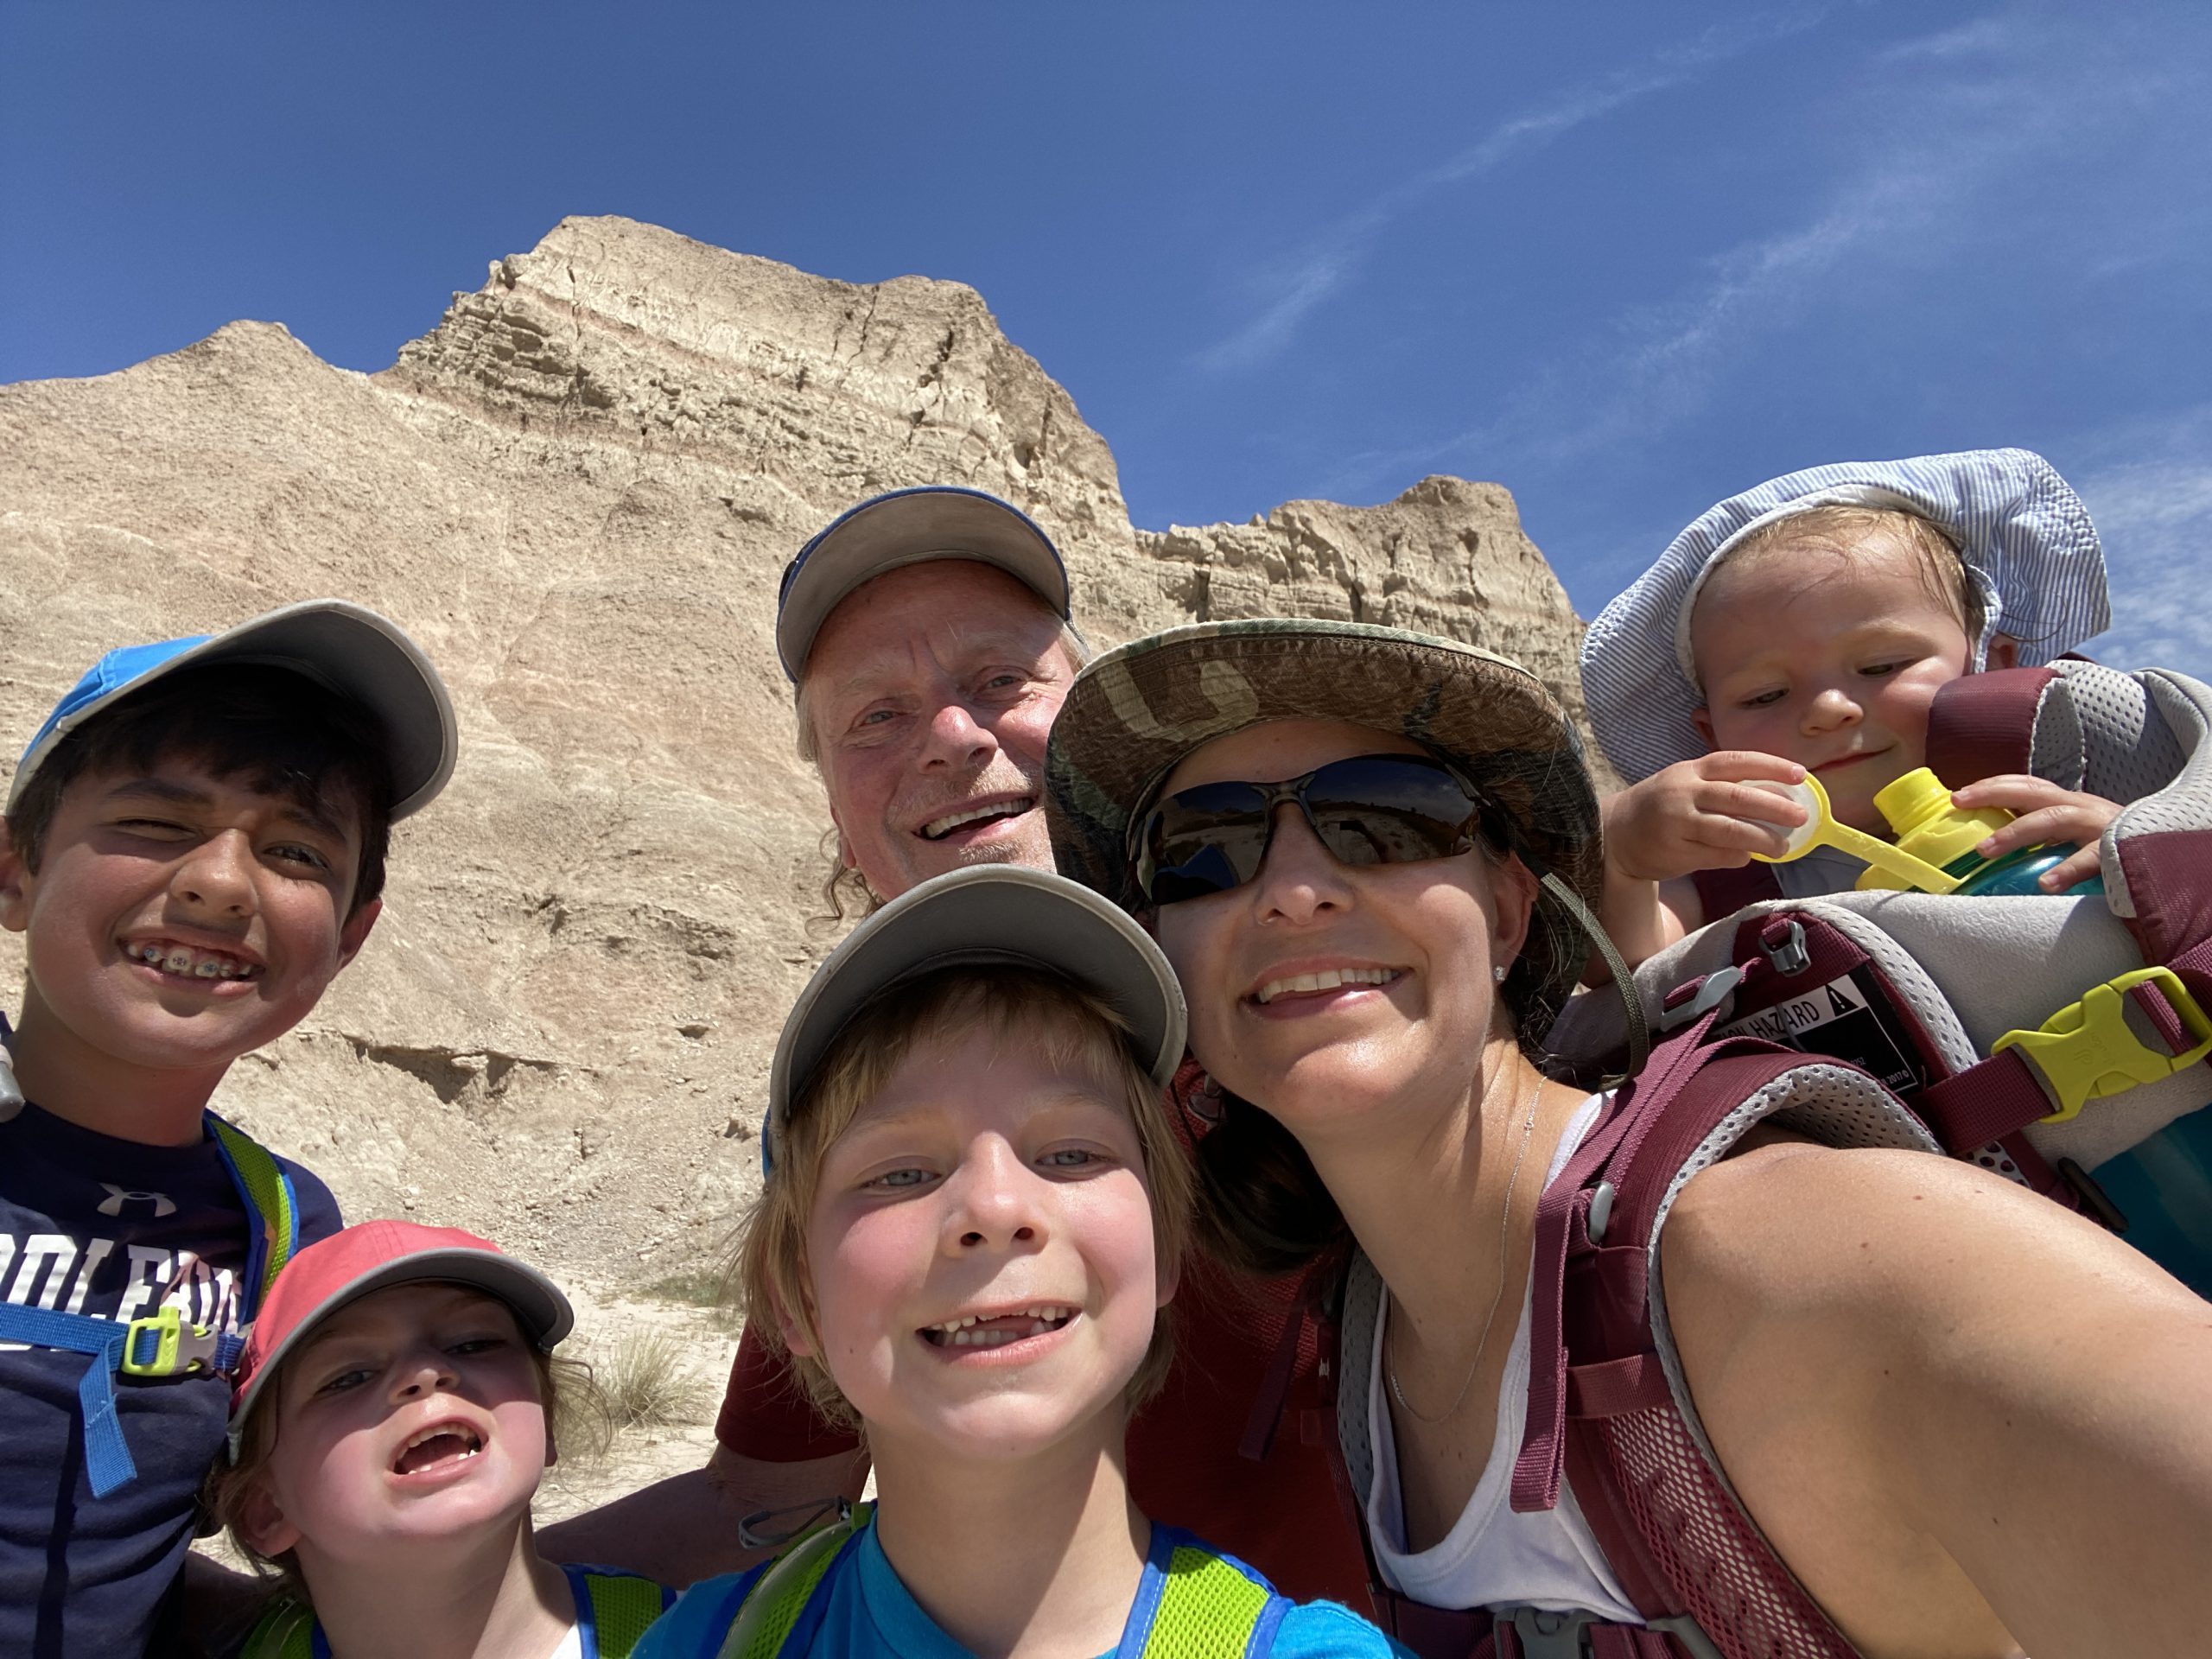 The Wyrobek family smile during a hiking trip